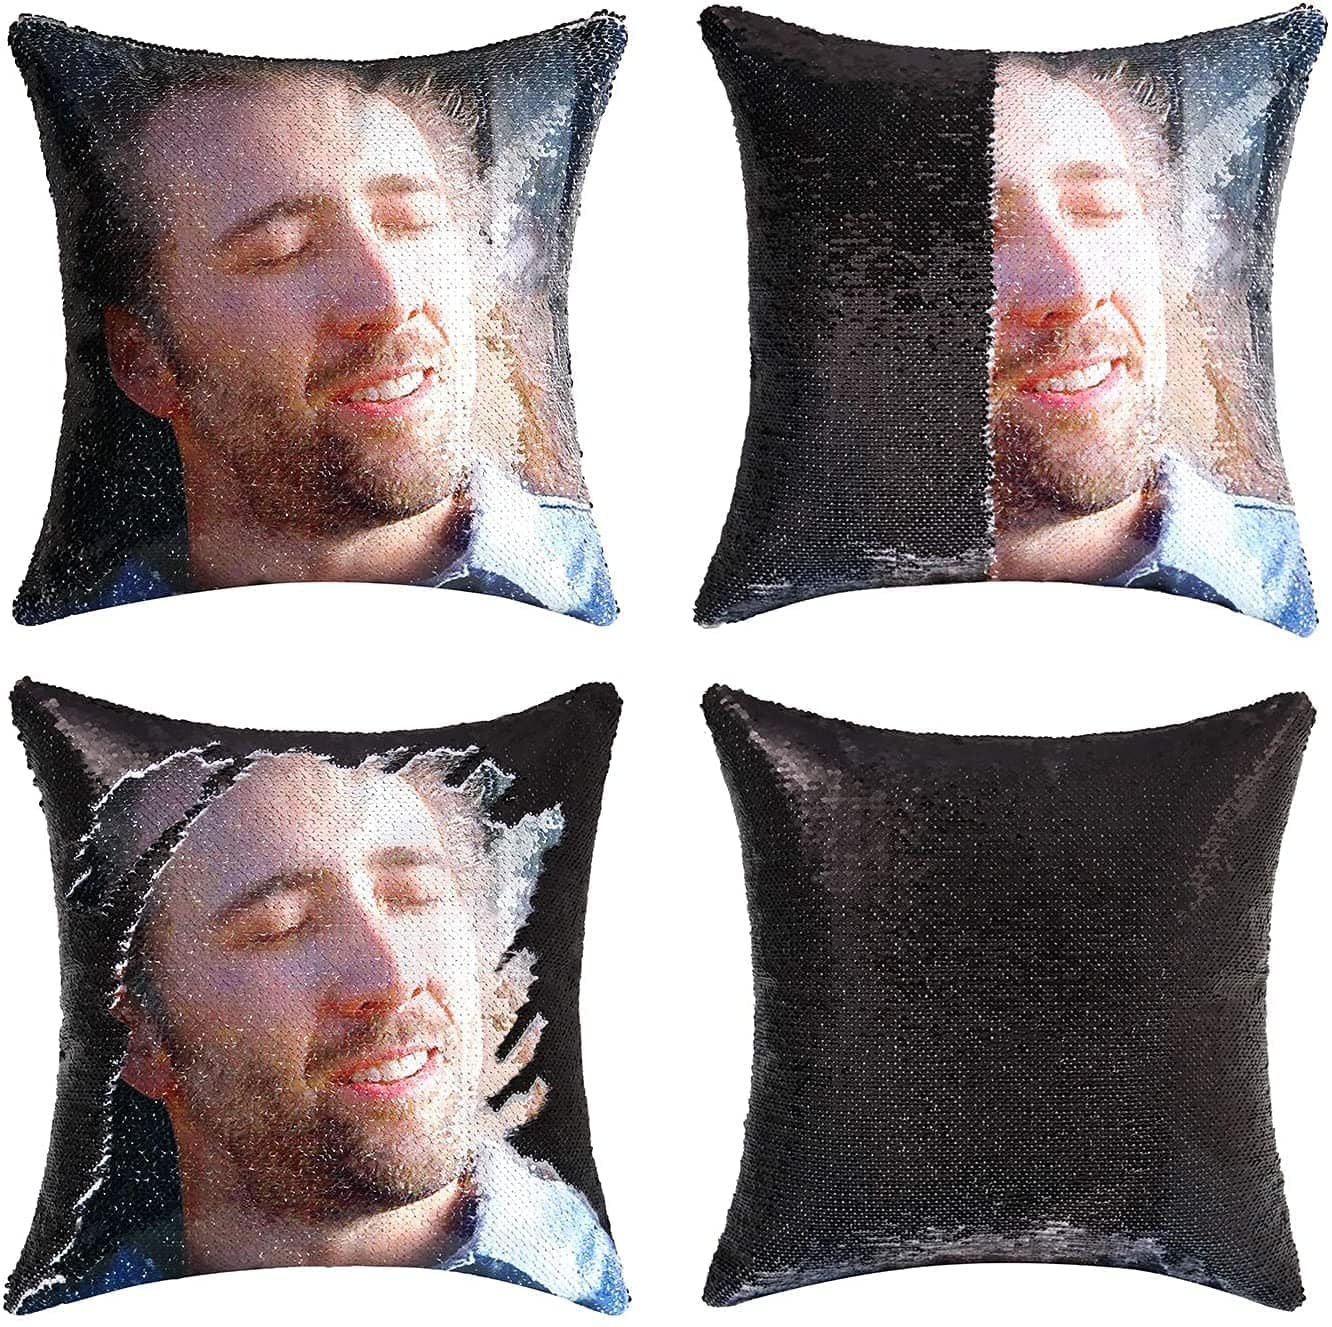 This one side printed Nicolas Cage face sequin pillowcase is an awful gift